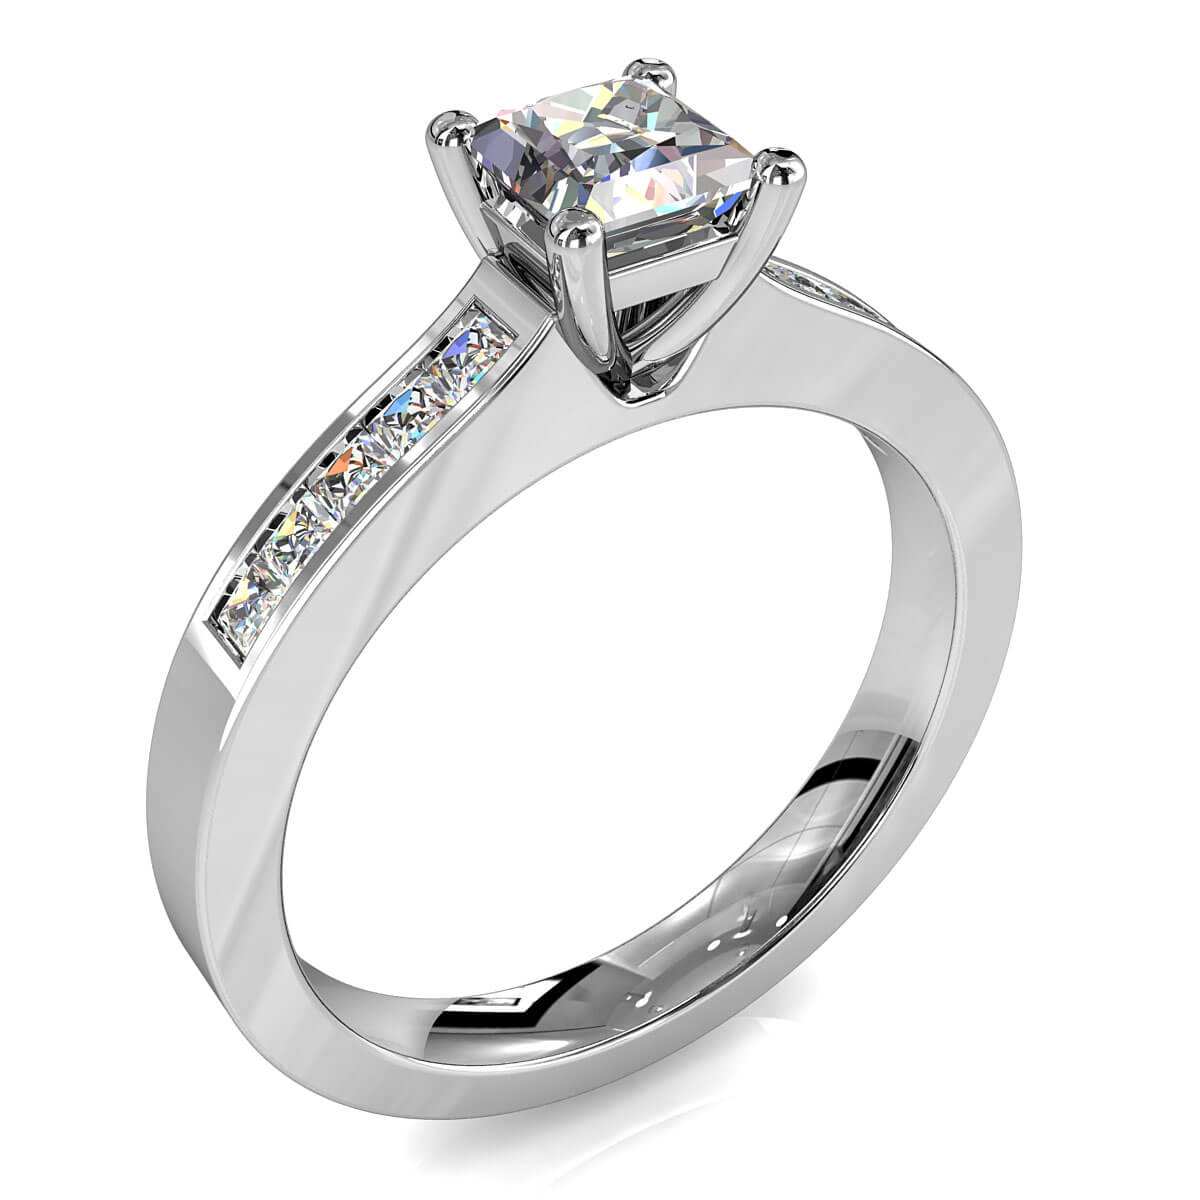 Princess Cut Solitaire Diamond Engagement Ring, 4 Claw Set on a Princess Channel Set Band.